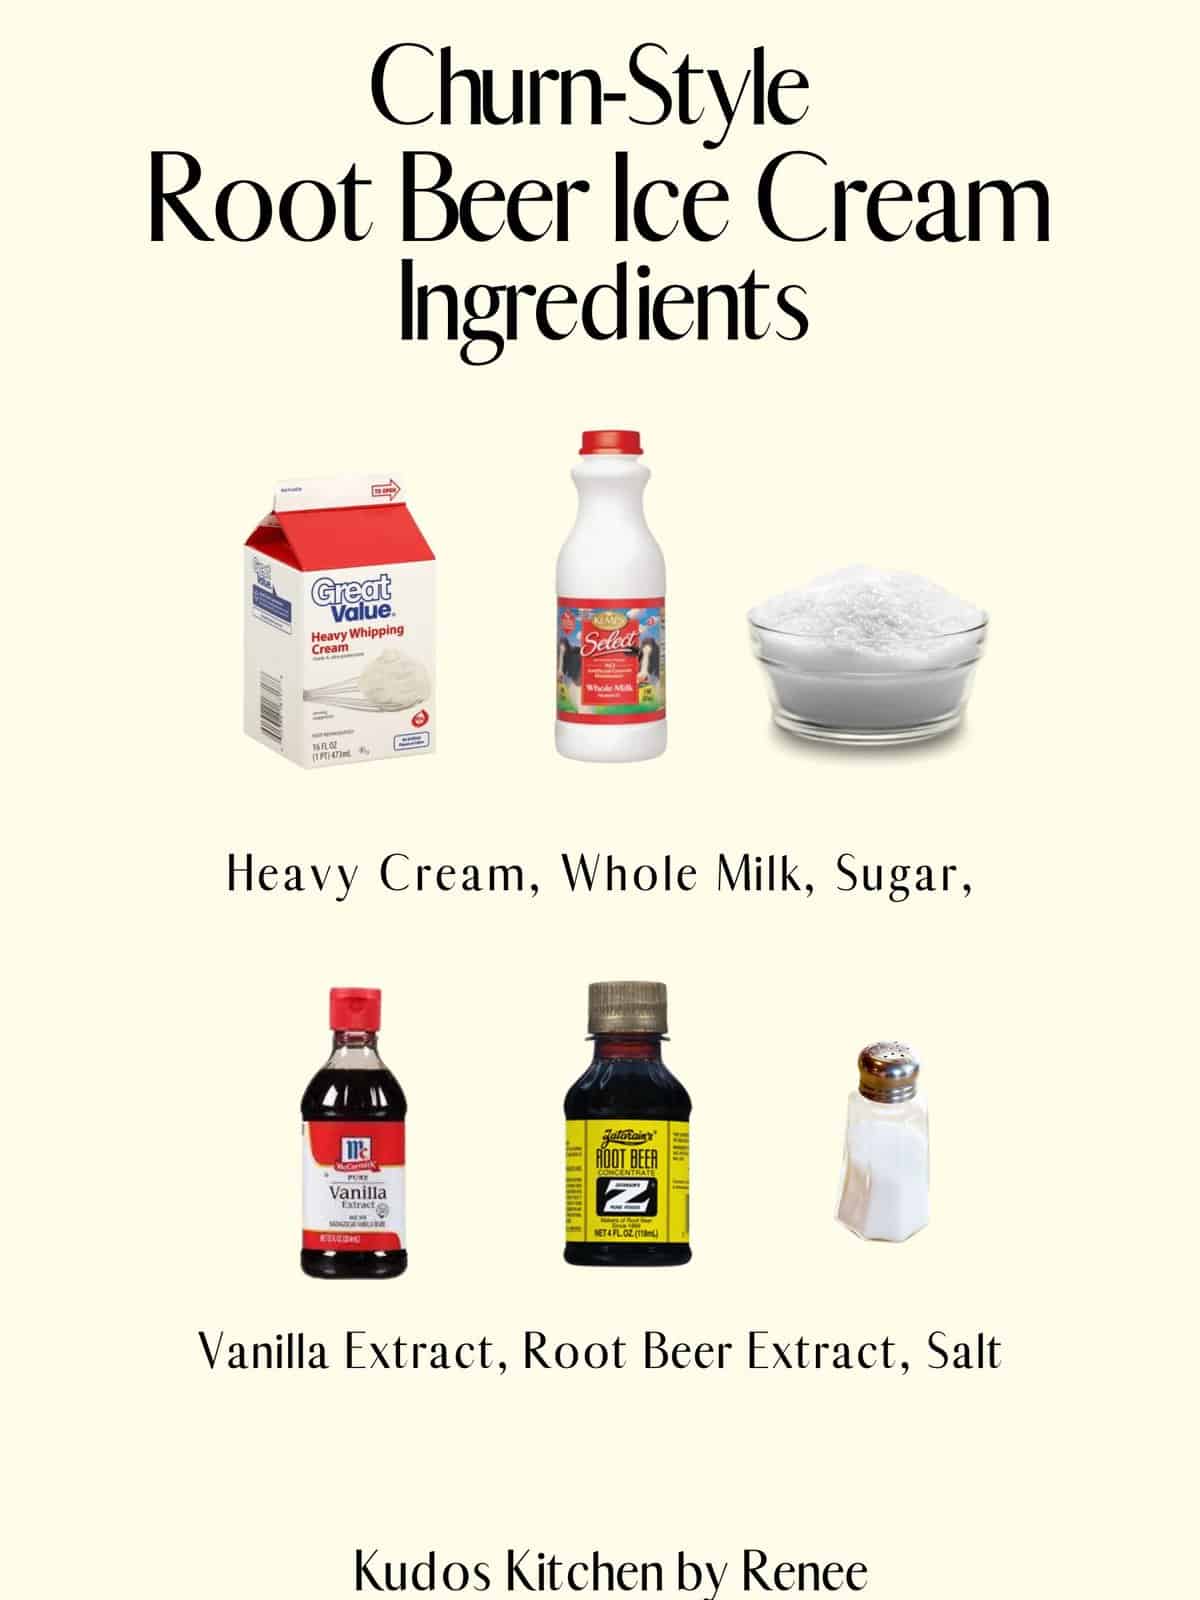 The visual ingredient list for making Churn-Style Root Beer Ice Cream.